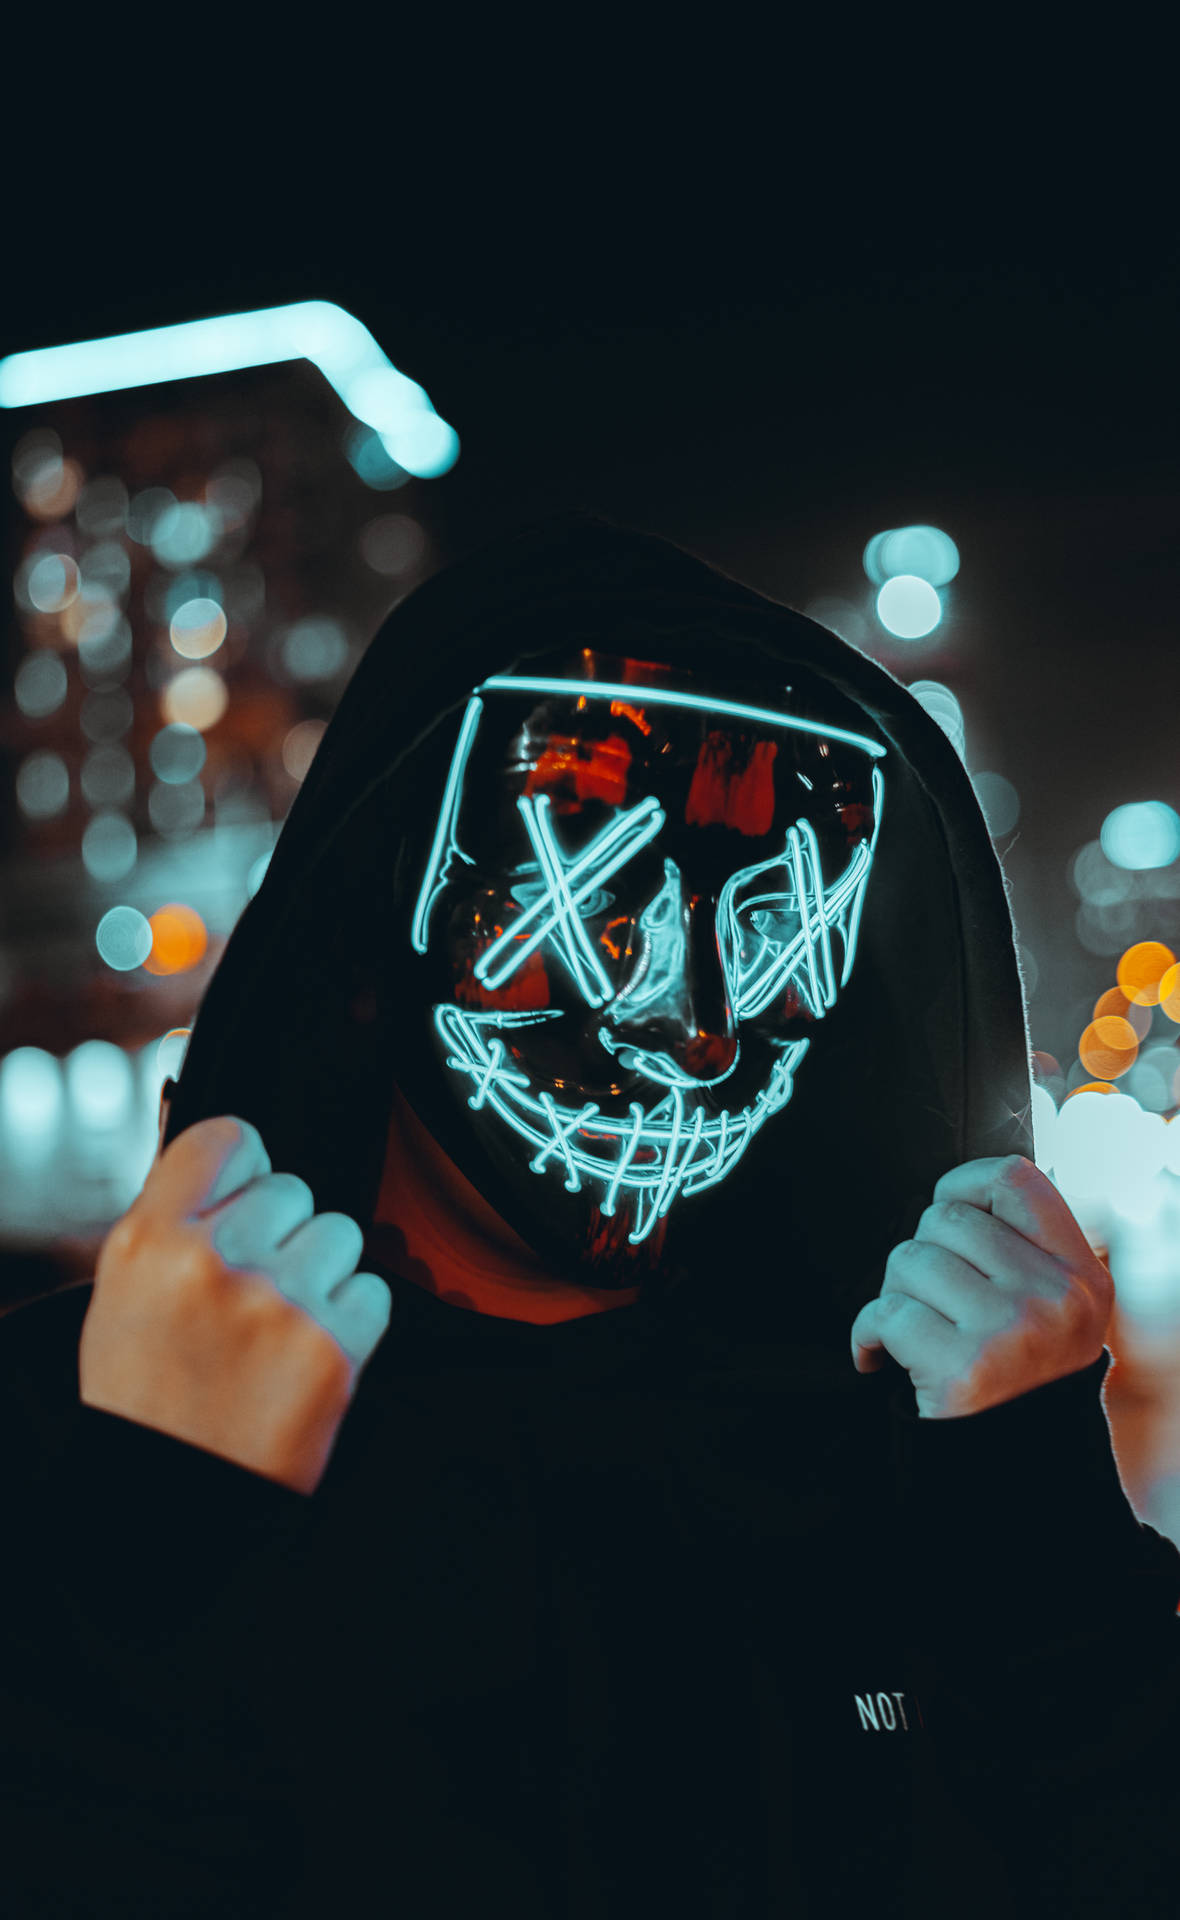 Hooded Man With The Purge Mask Wallpaper